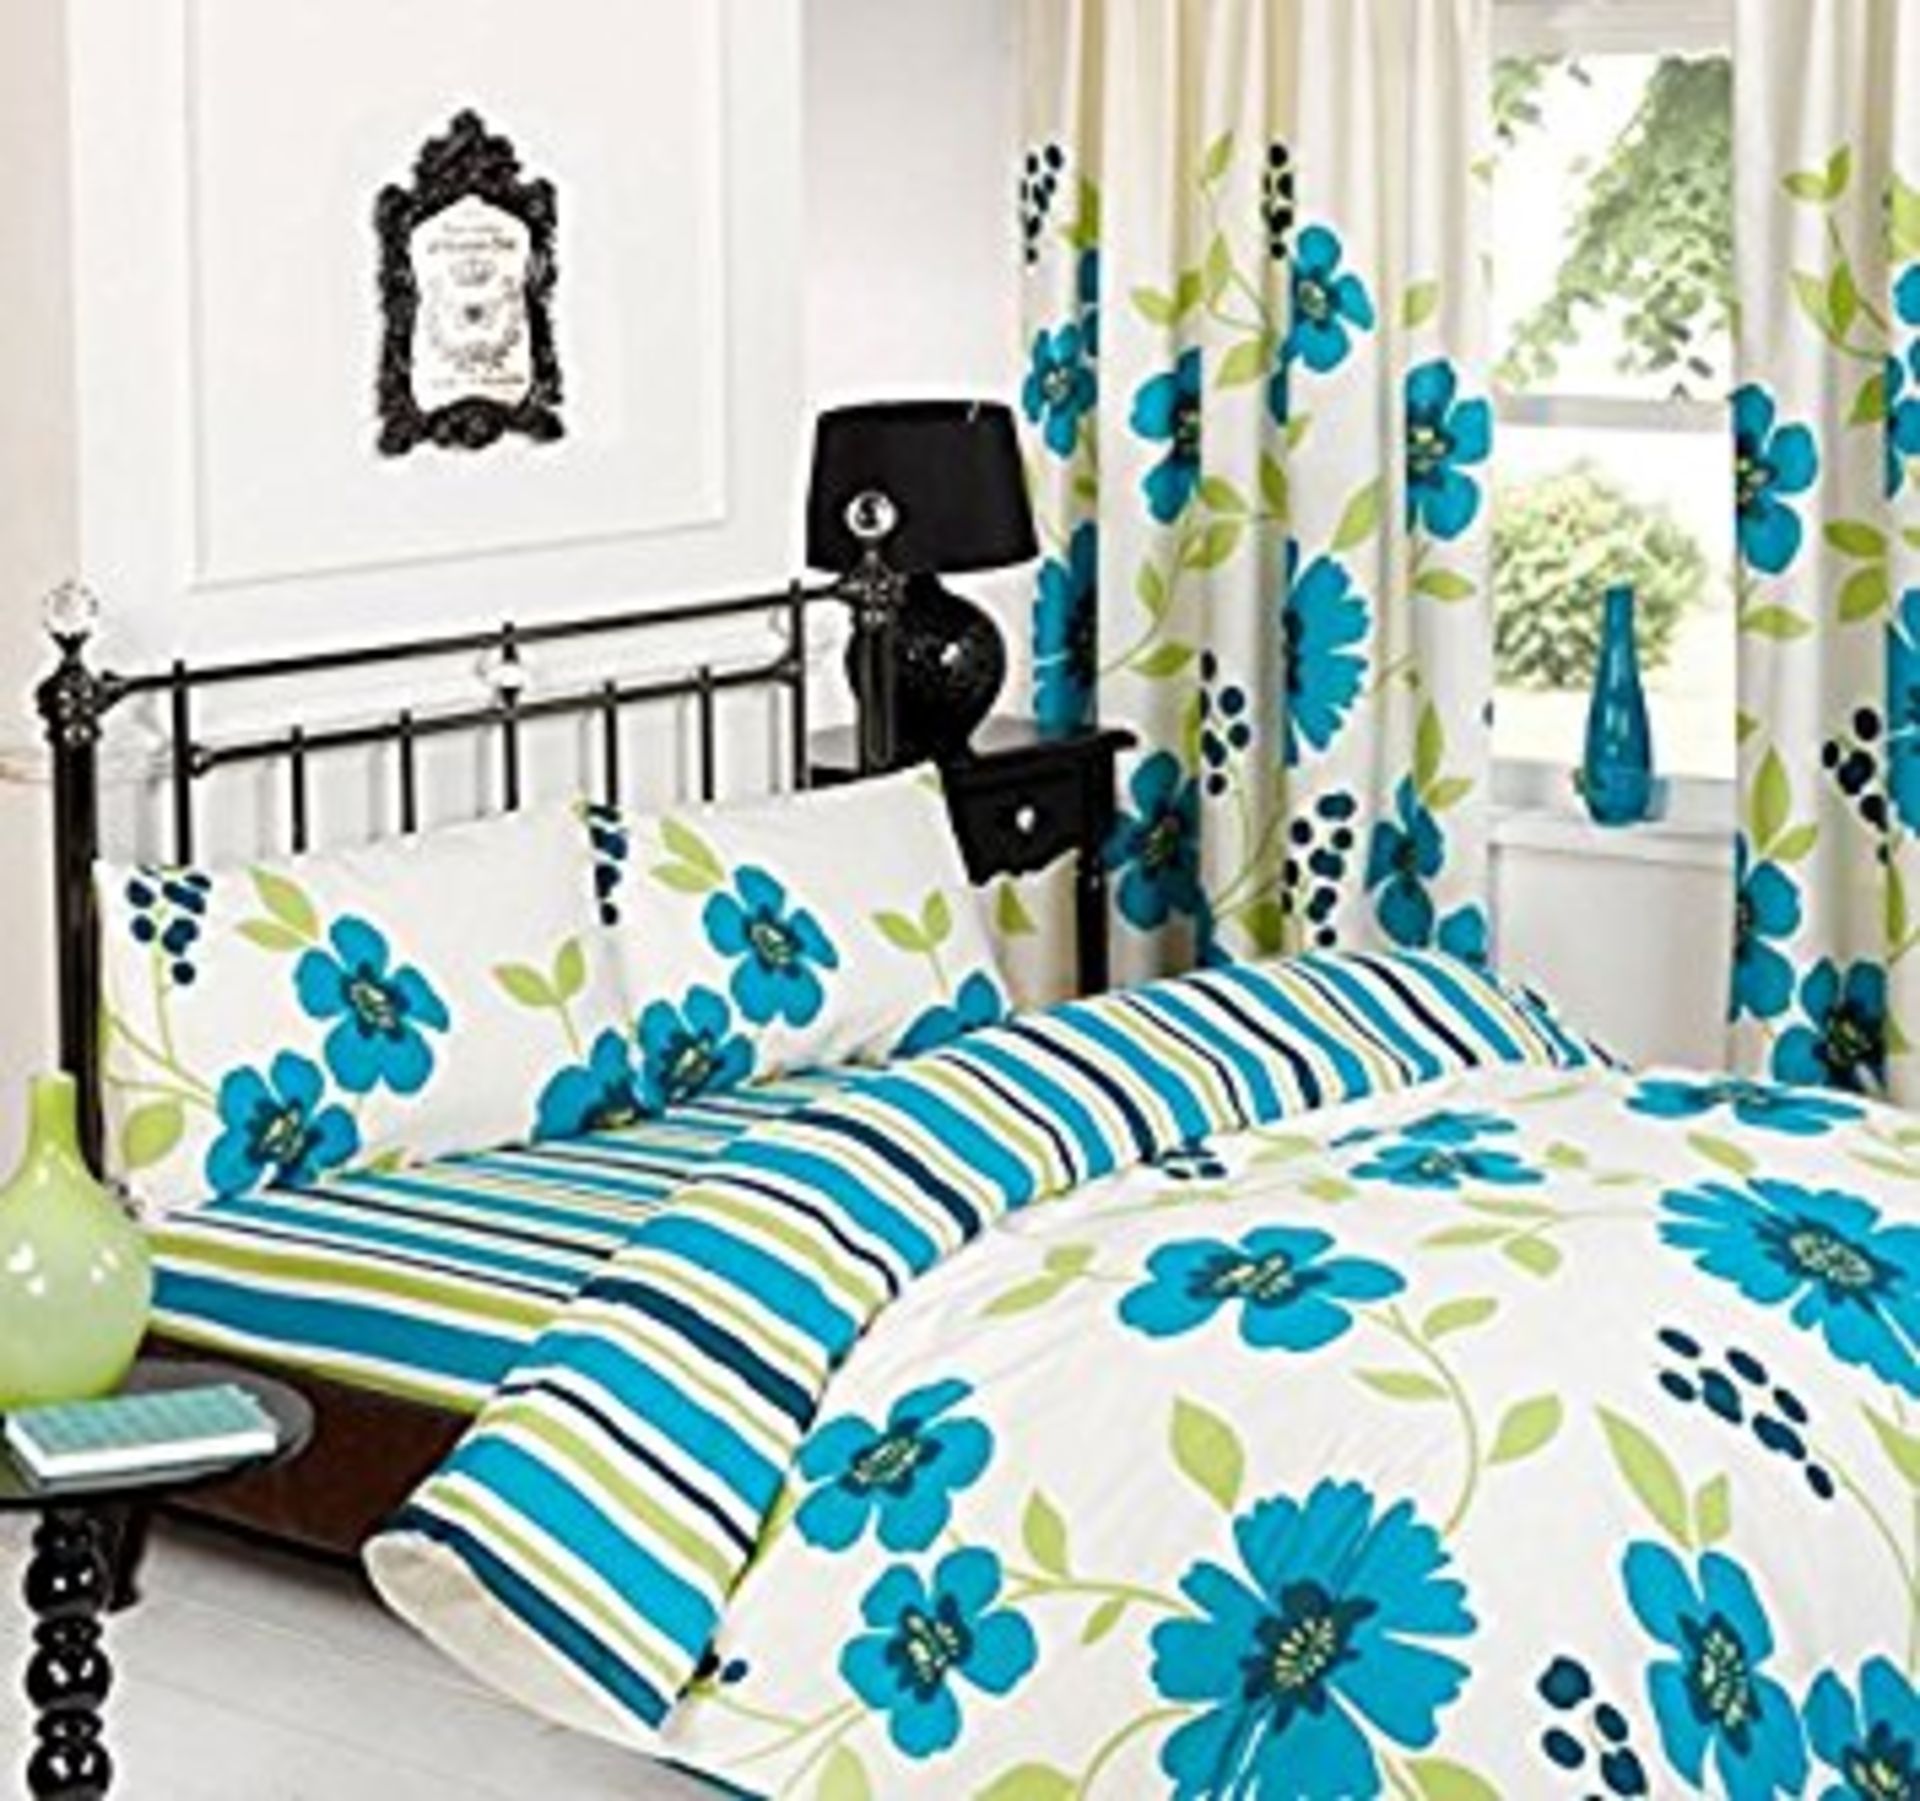 V Brand New Laura Secret Kenzie Teal & White Flowers & Stripes Three Piece Double Bed Luxury Printed